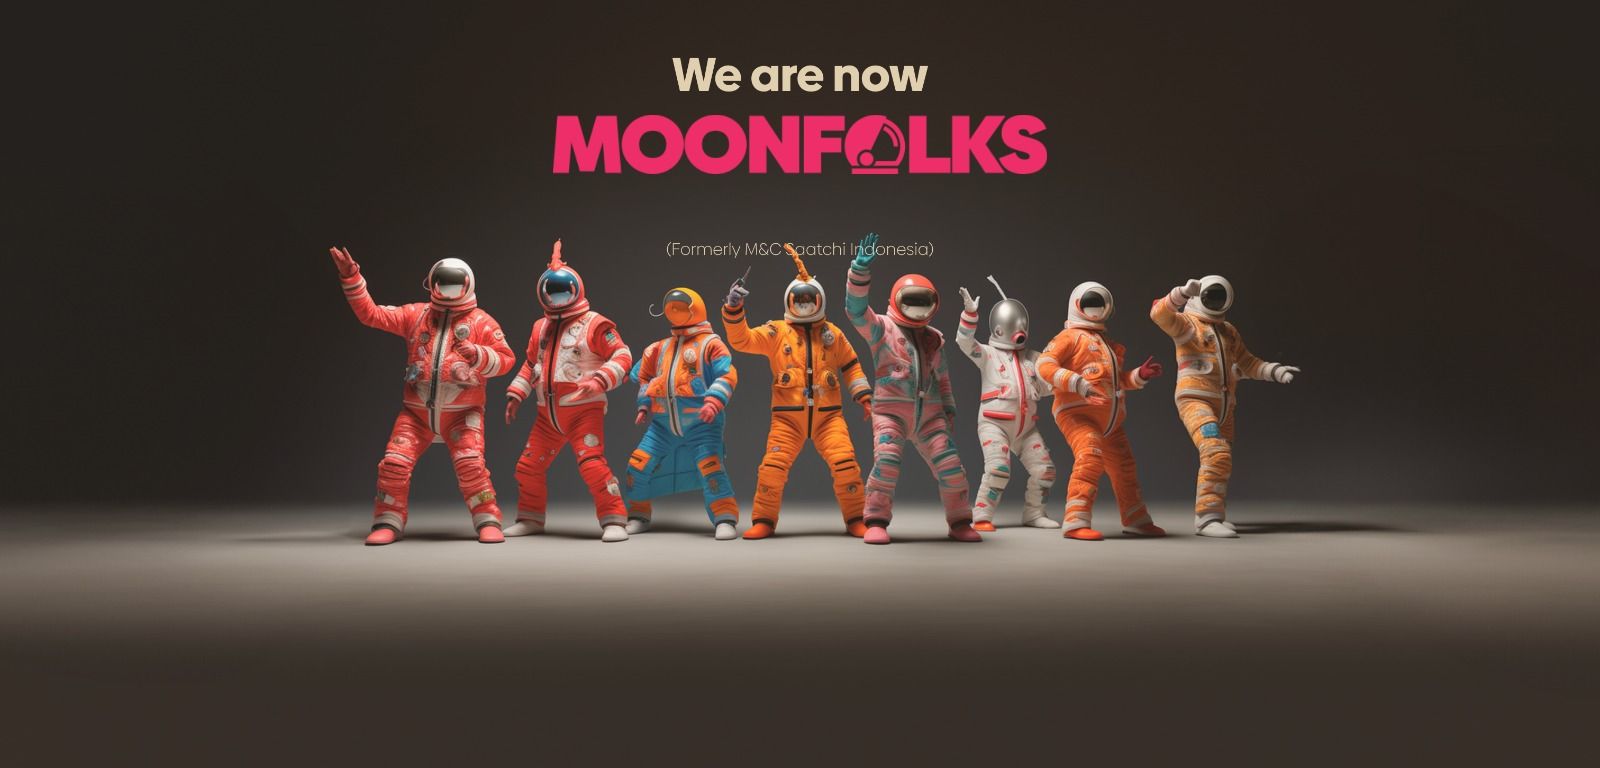 Moonfolks rebrand from M&C Saatchi led by Anish Daryani